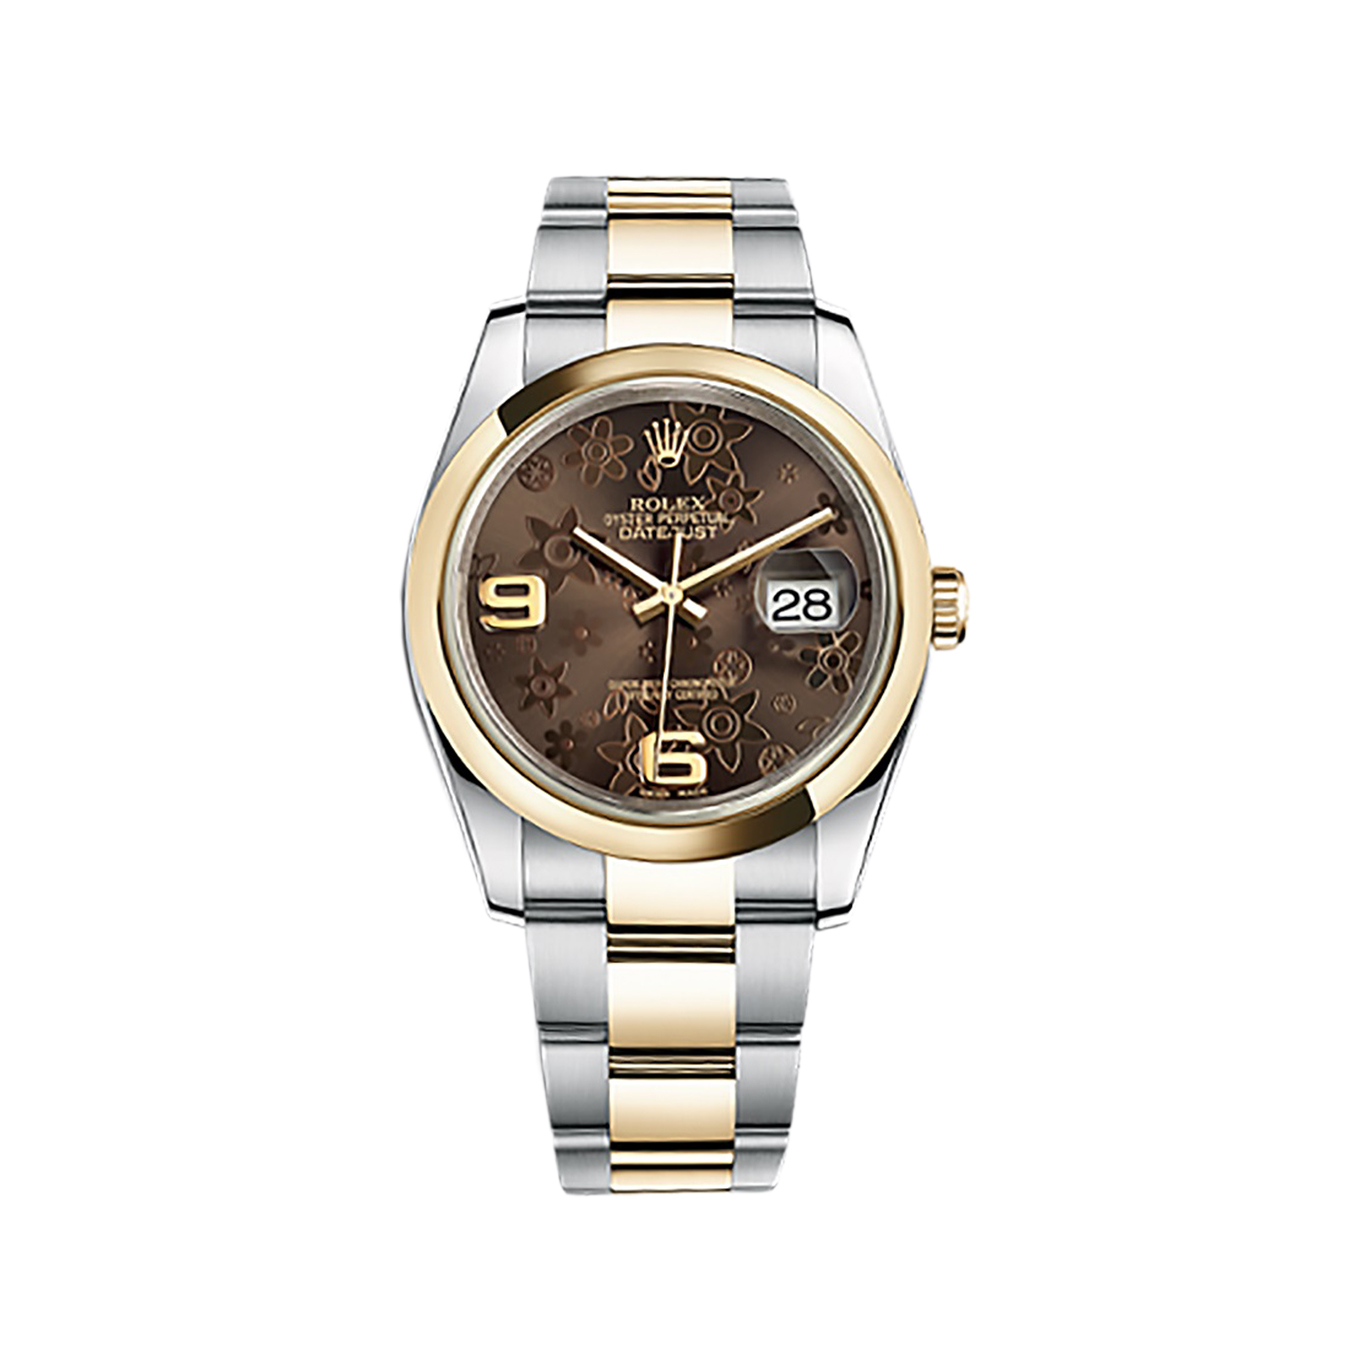 Datejust 36 116203 Gold & Stainless Steel Watch (Bronze Floral Motif) - Click Image to Close